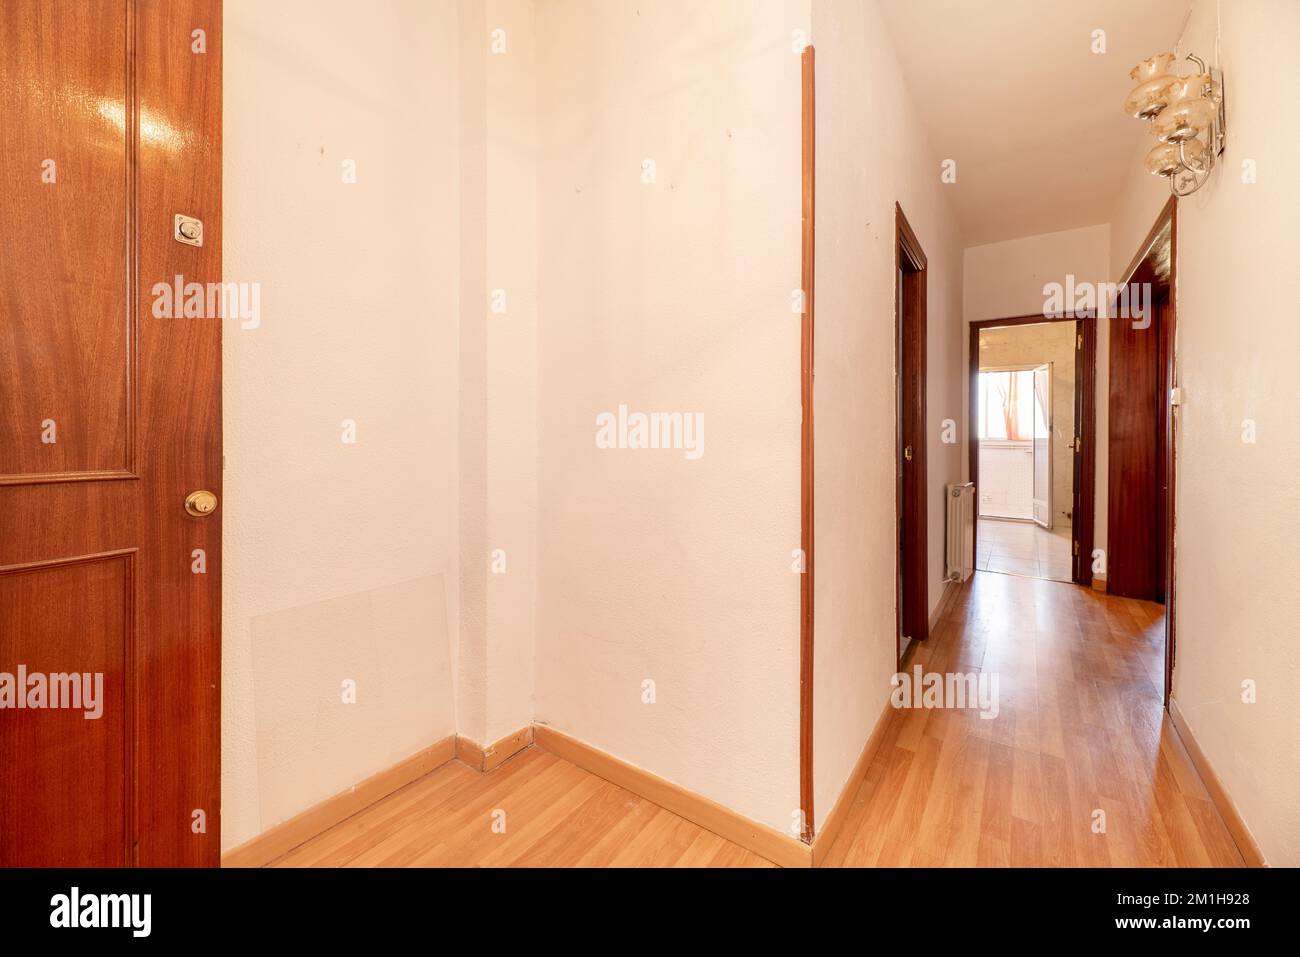 Lobby of a house with a solid wood access door, laminated flooring and sconces with crystal lampshades Stock Photo